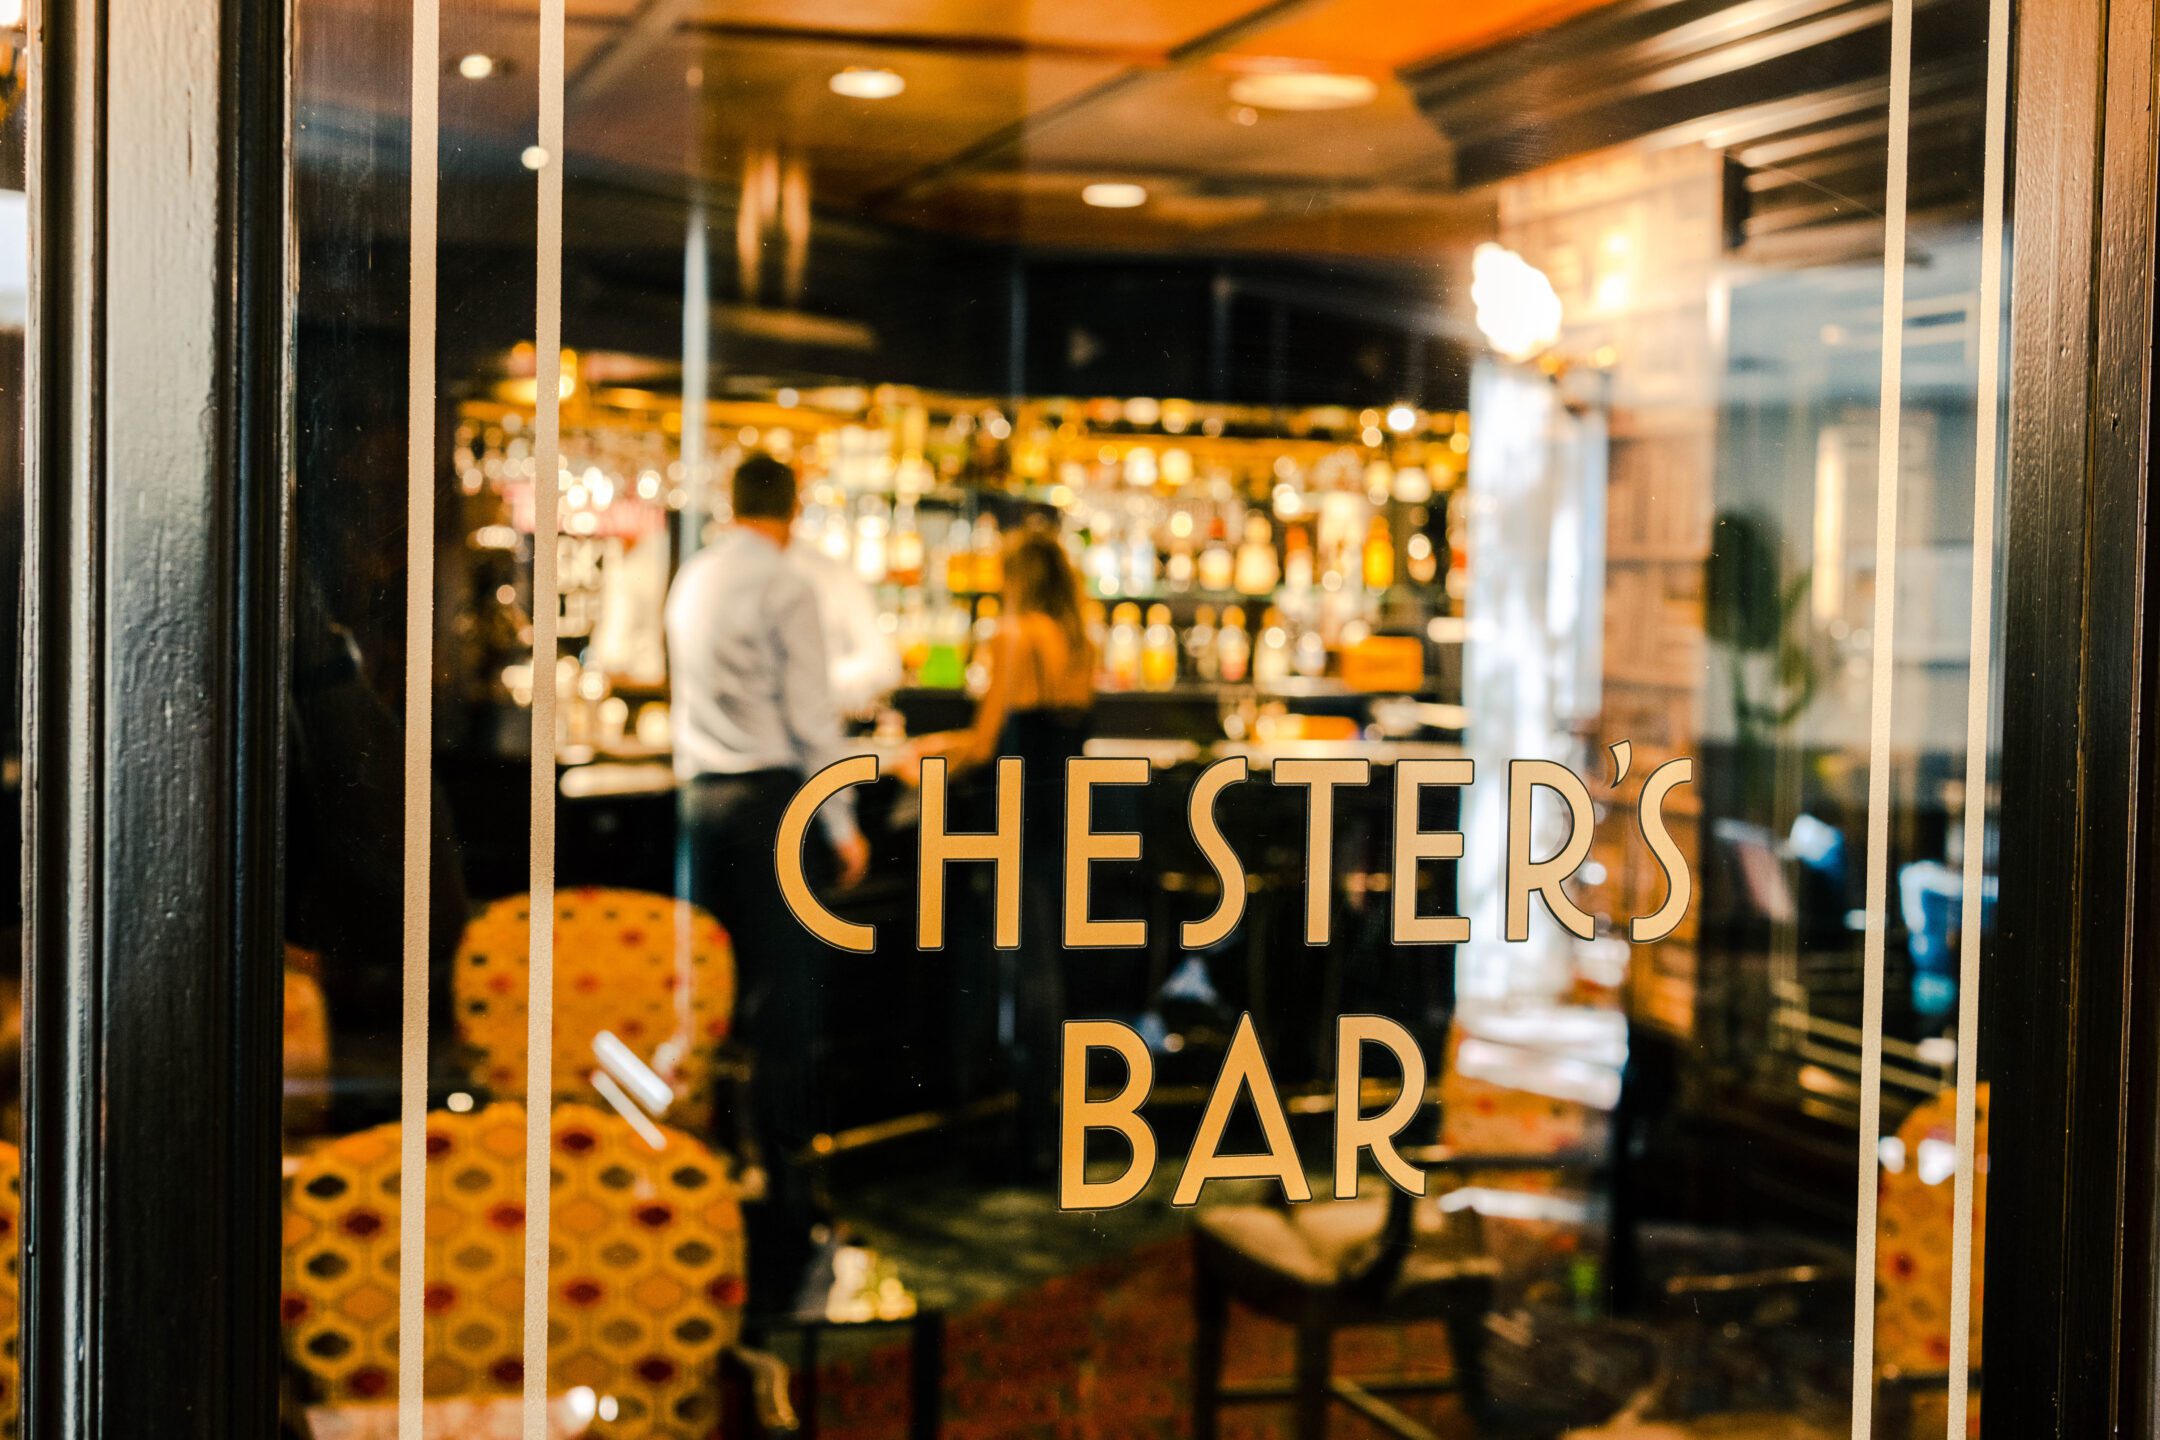 Chesters Bar